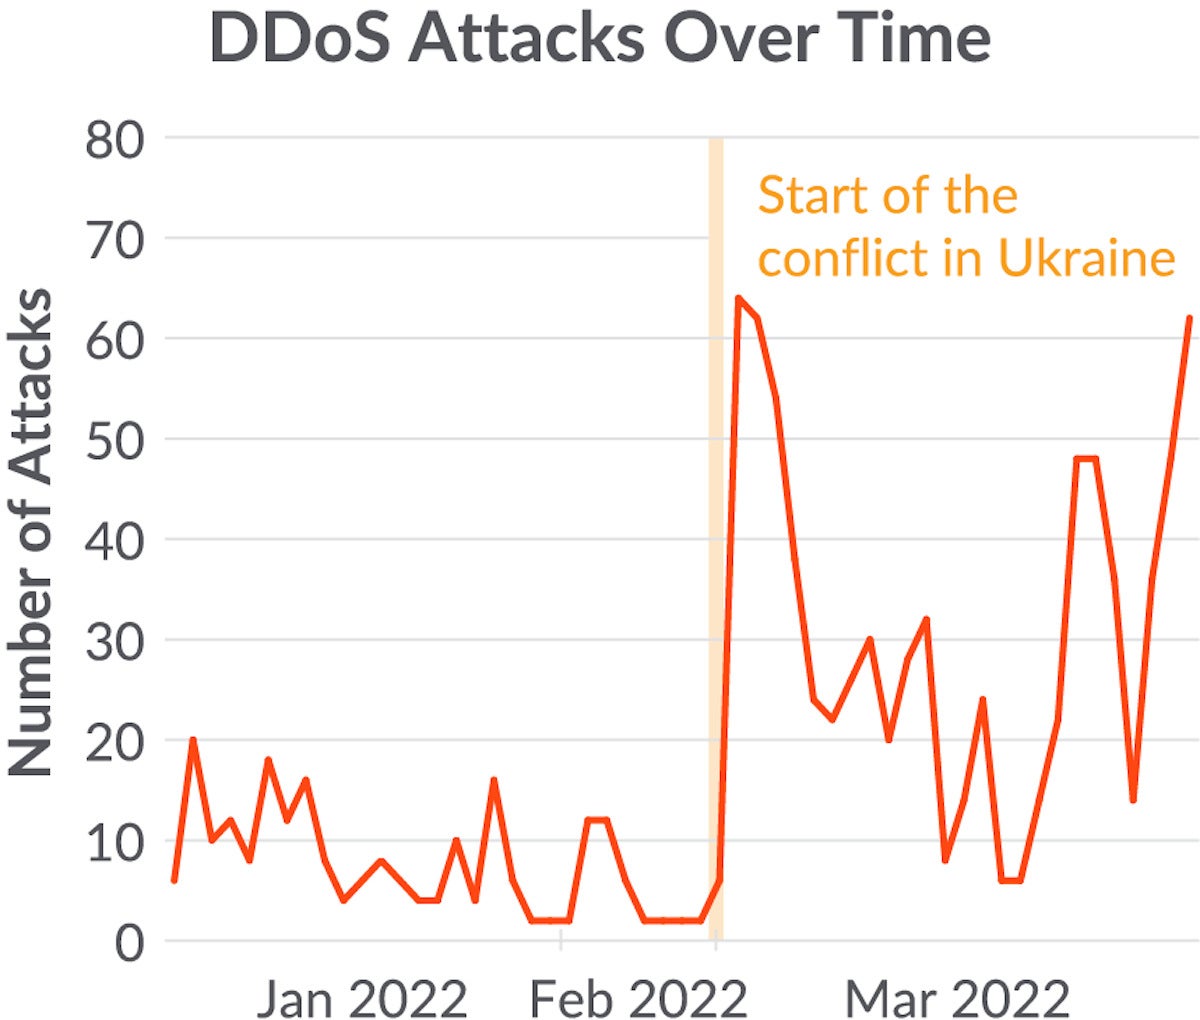 sysdig threat report ddos attack incidence over time